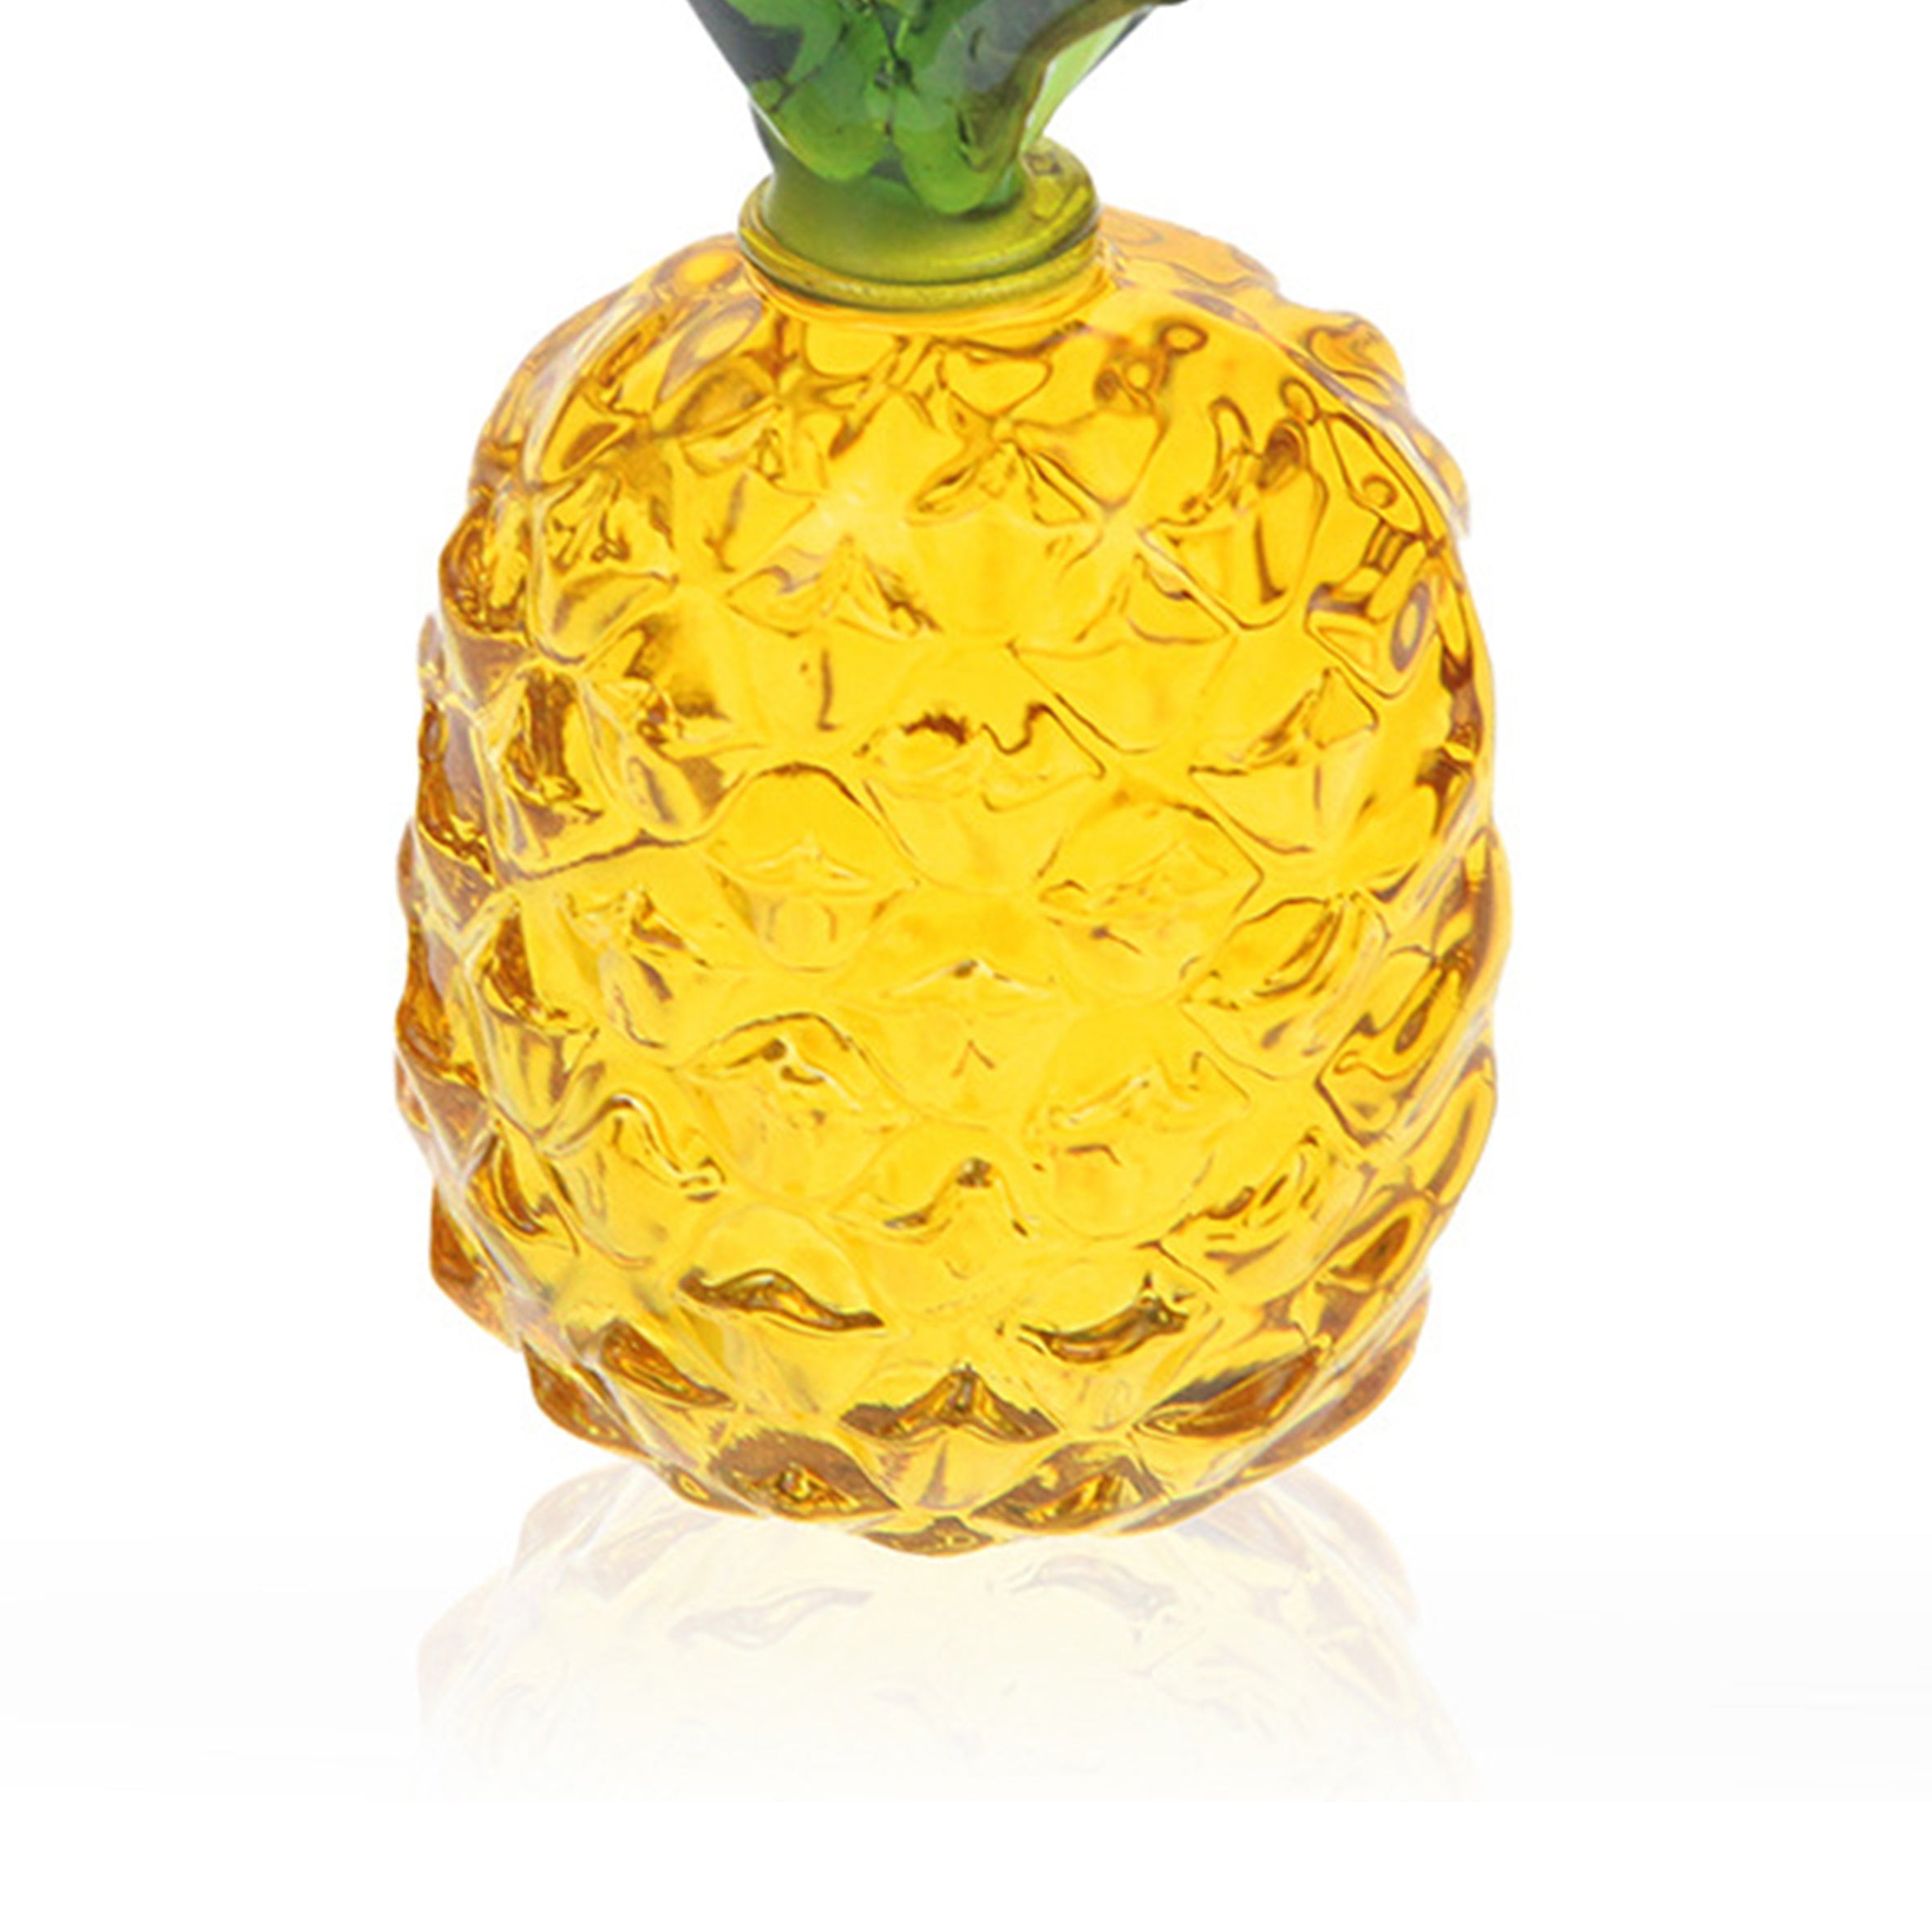 Pineapple Glass Decorative Gifts W1824